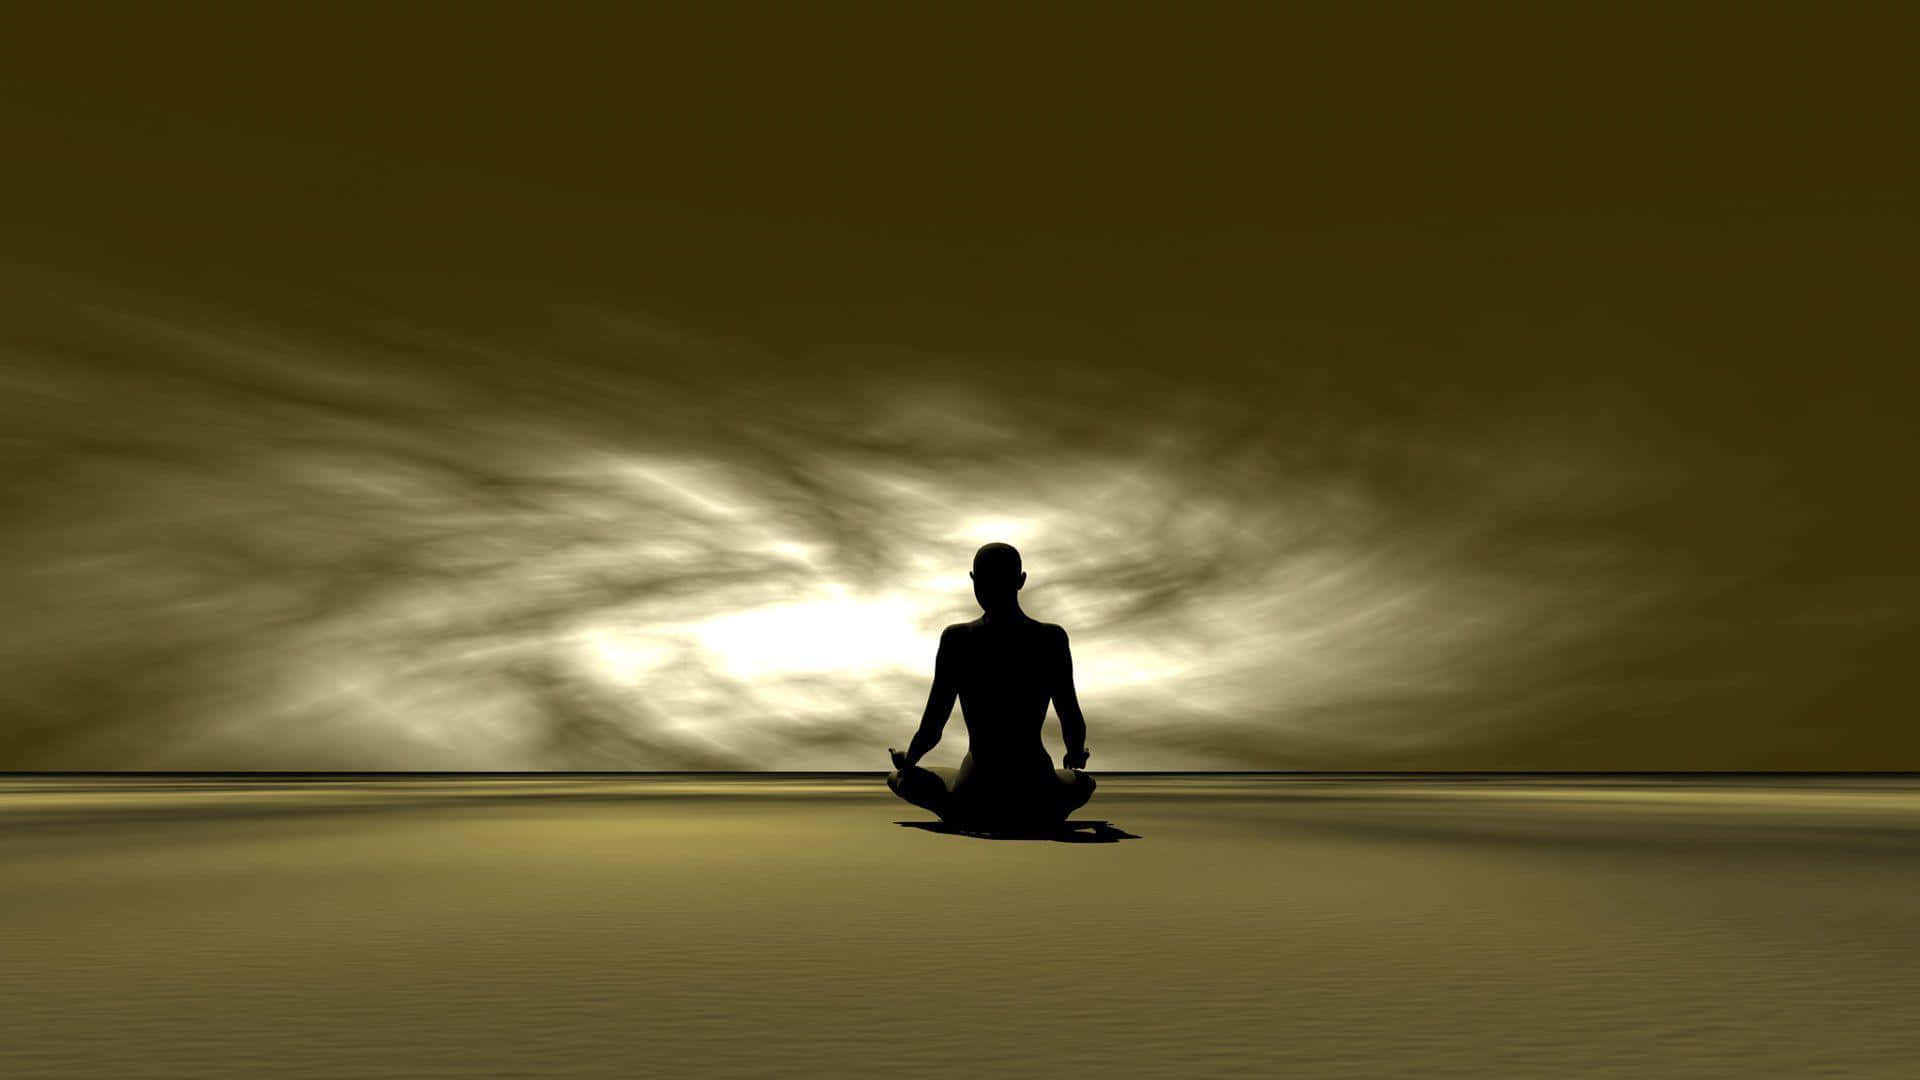 Find your inner peace through meditation